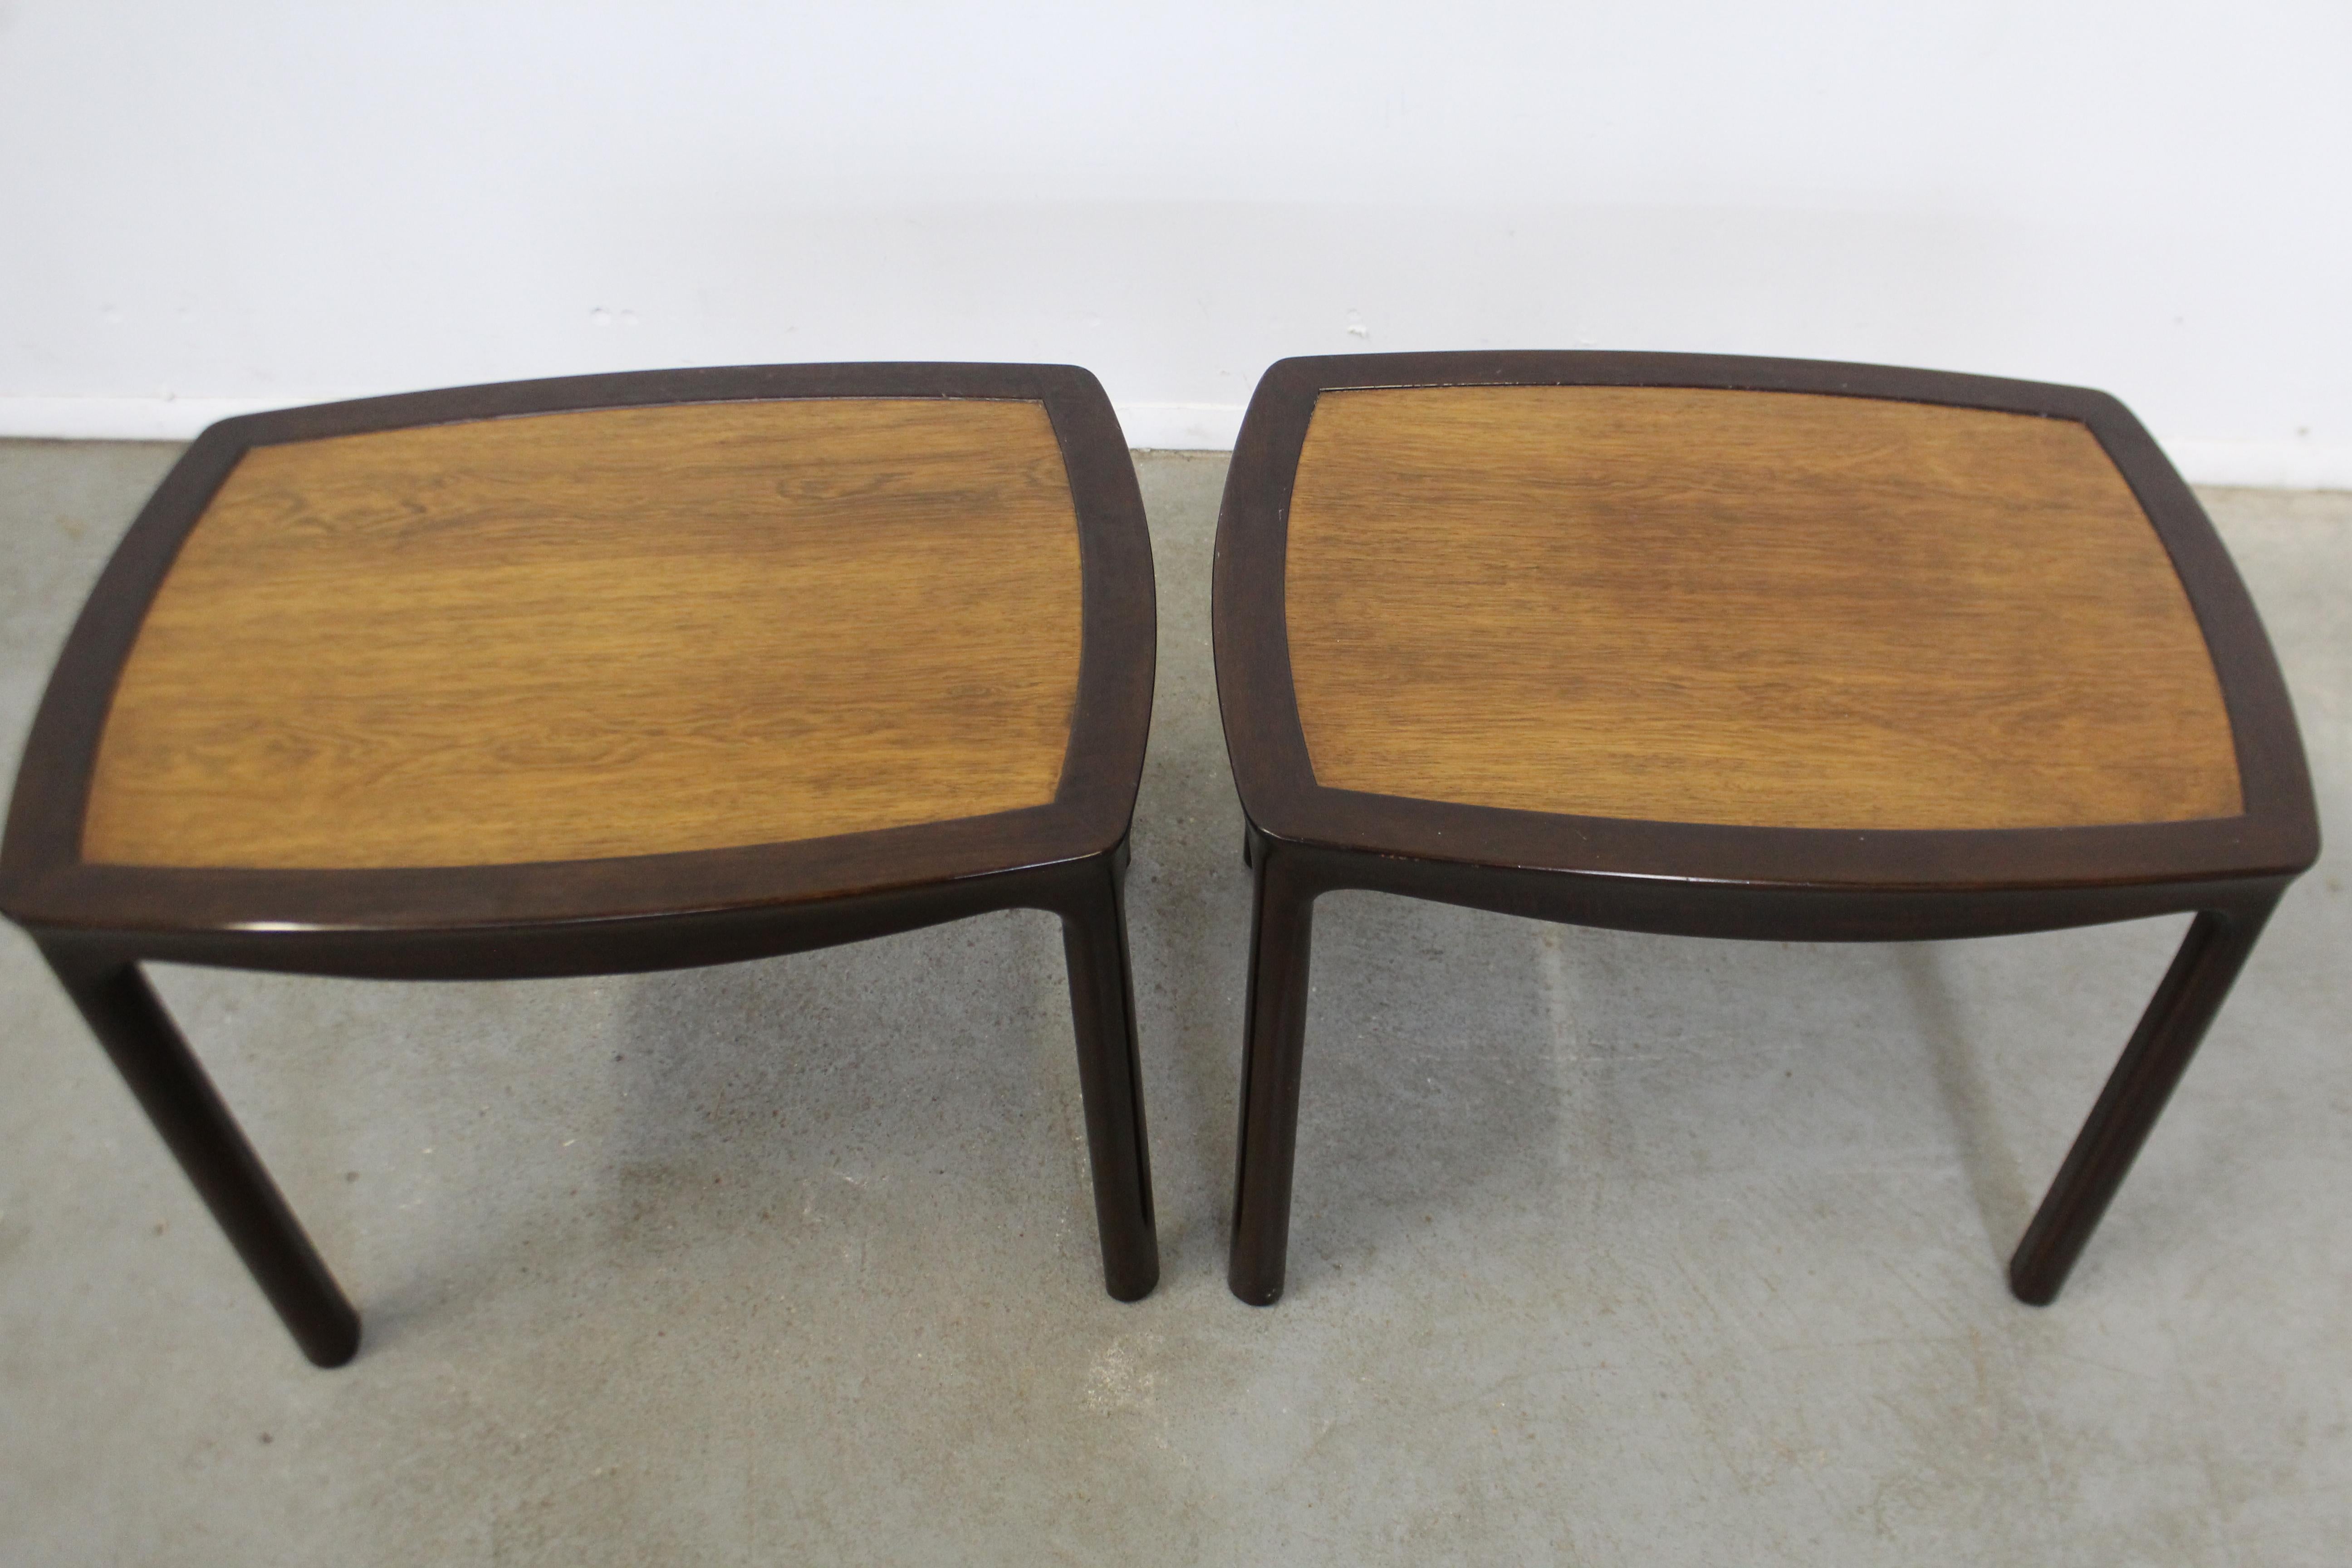 Late 20th Century Pair of Mid-Century Modern Asian Edward Wormley for Dunbar Rosewood End Tables